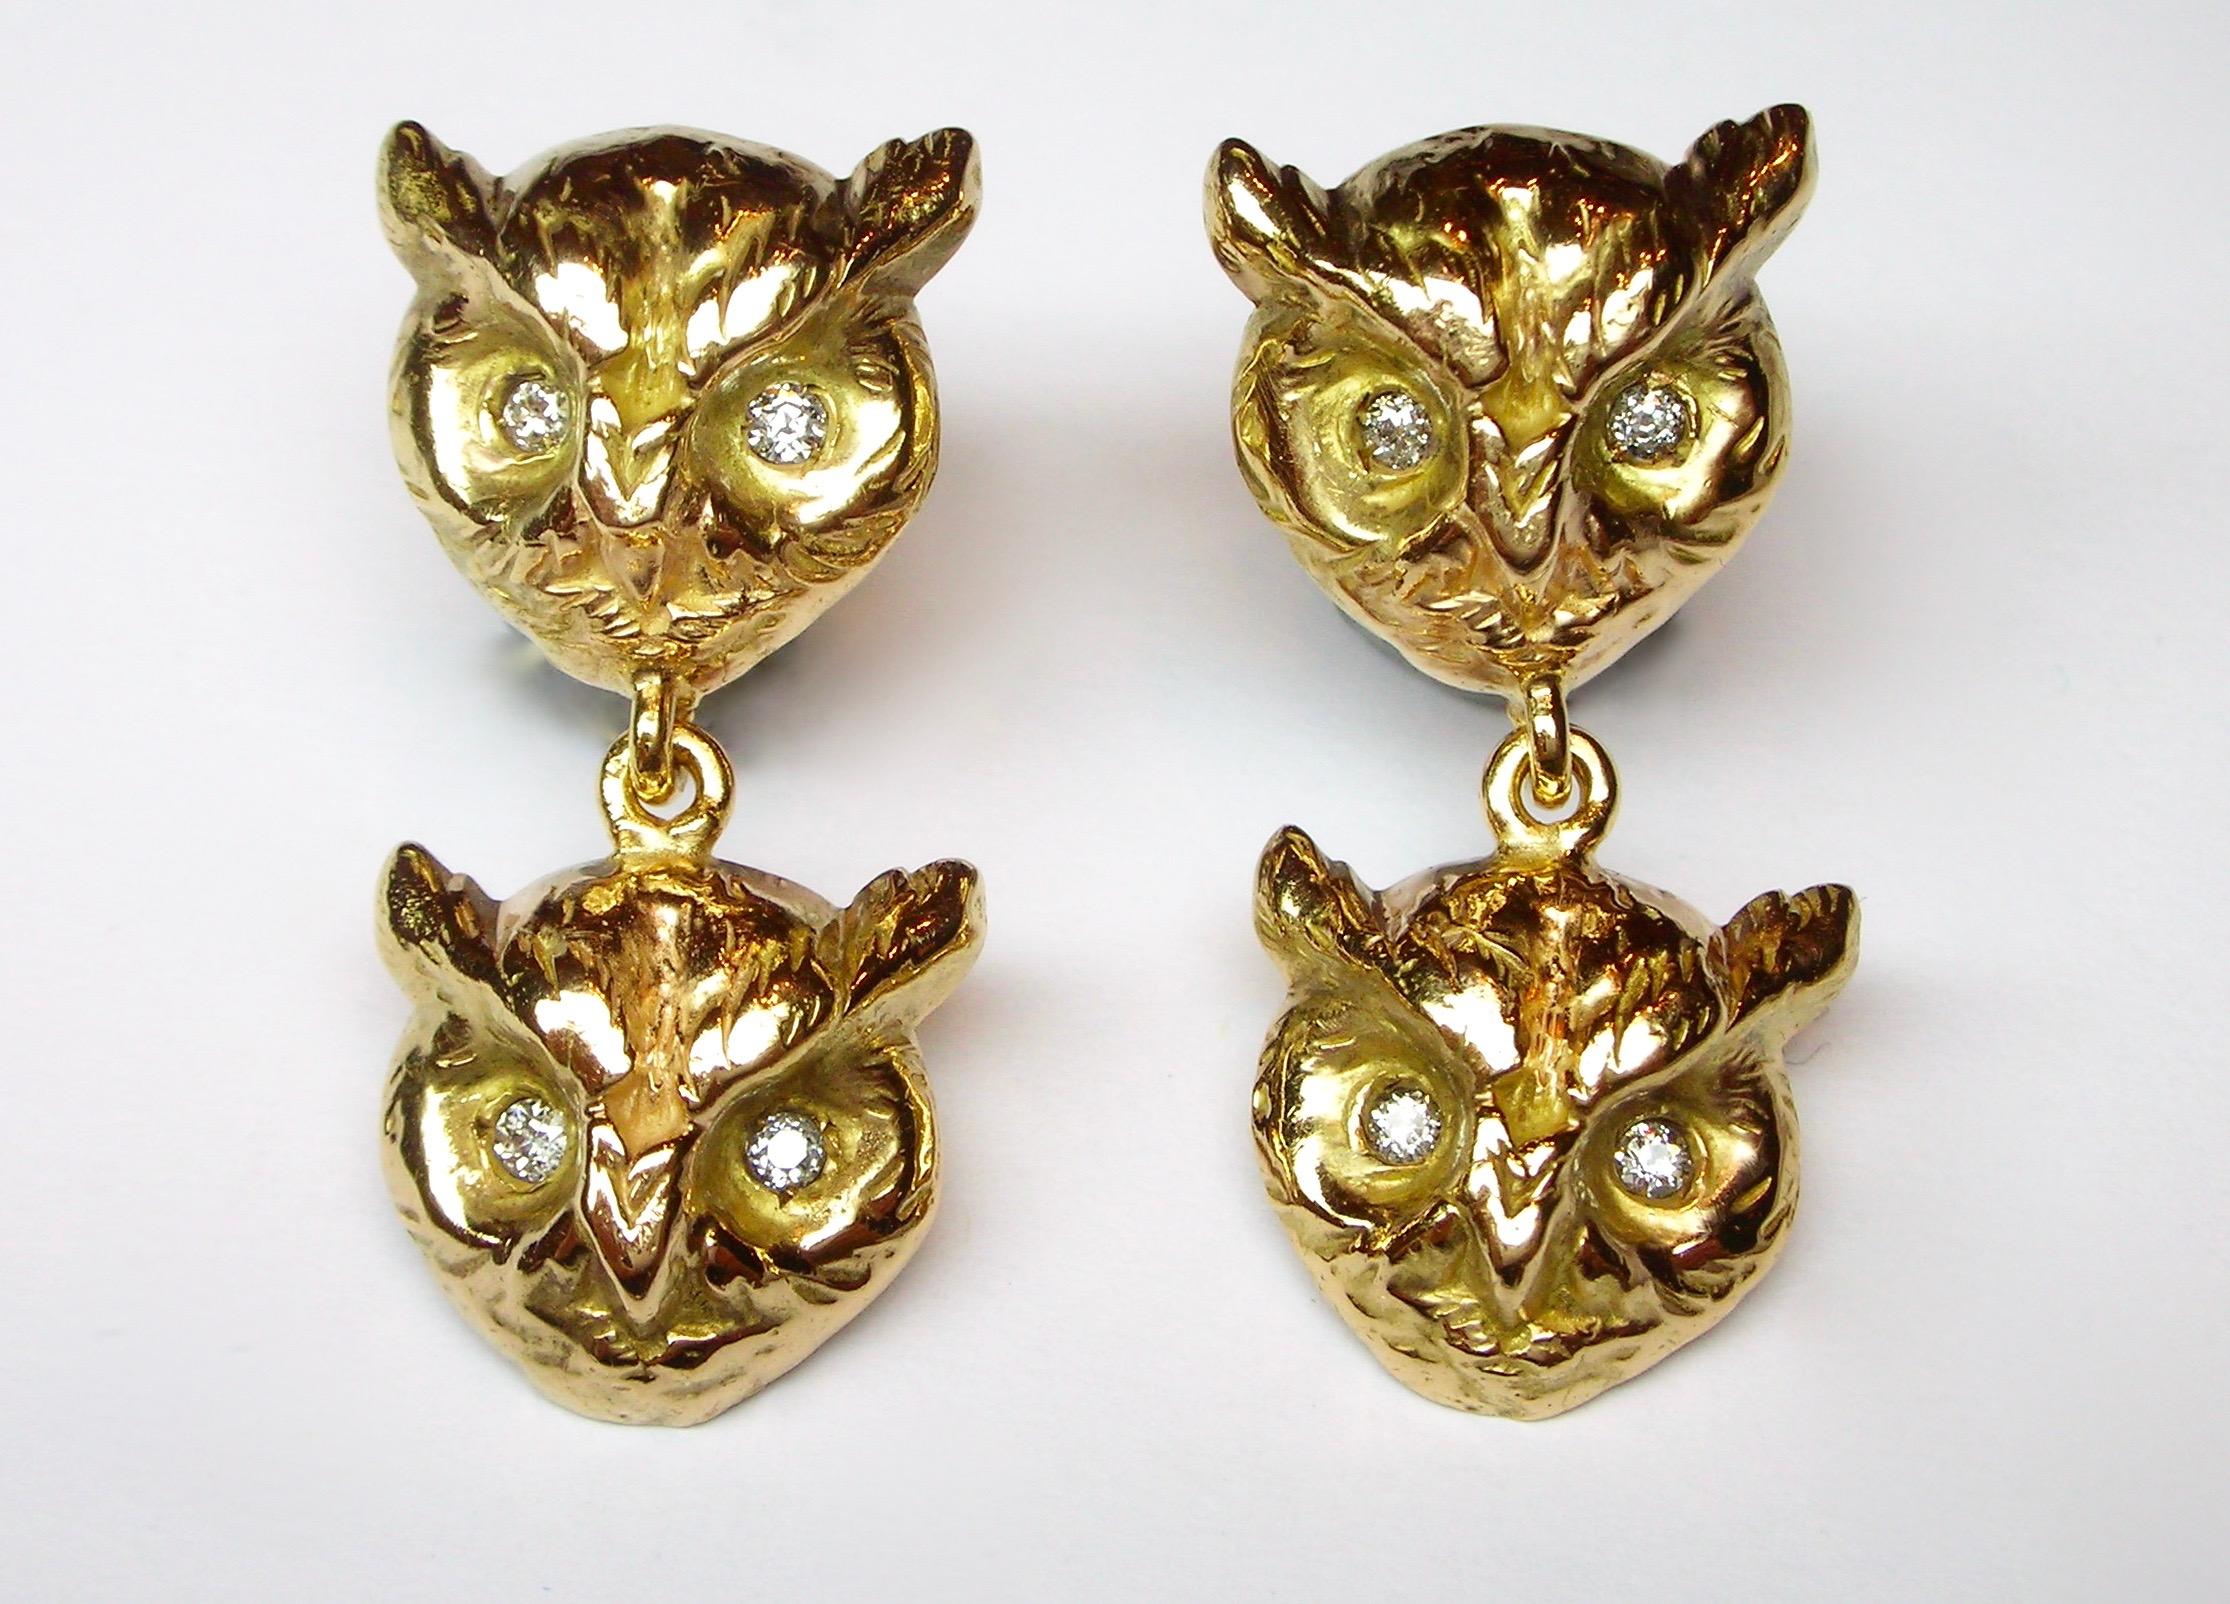 Owl shaped earrings in 18KT gold and diamonds, with a secure stud fitting to reverse. 

